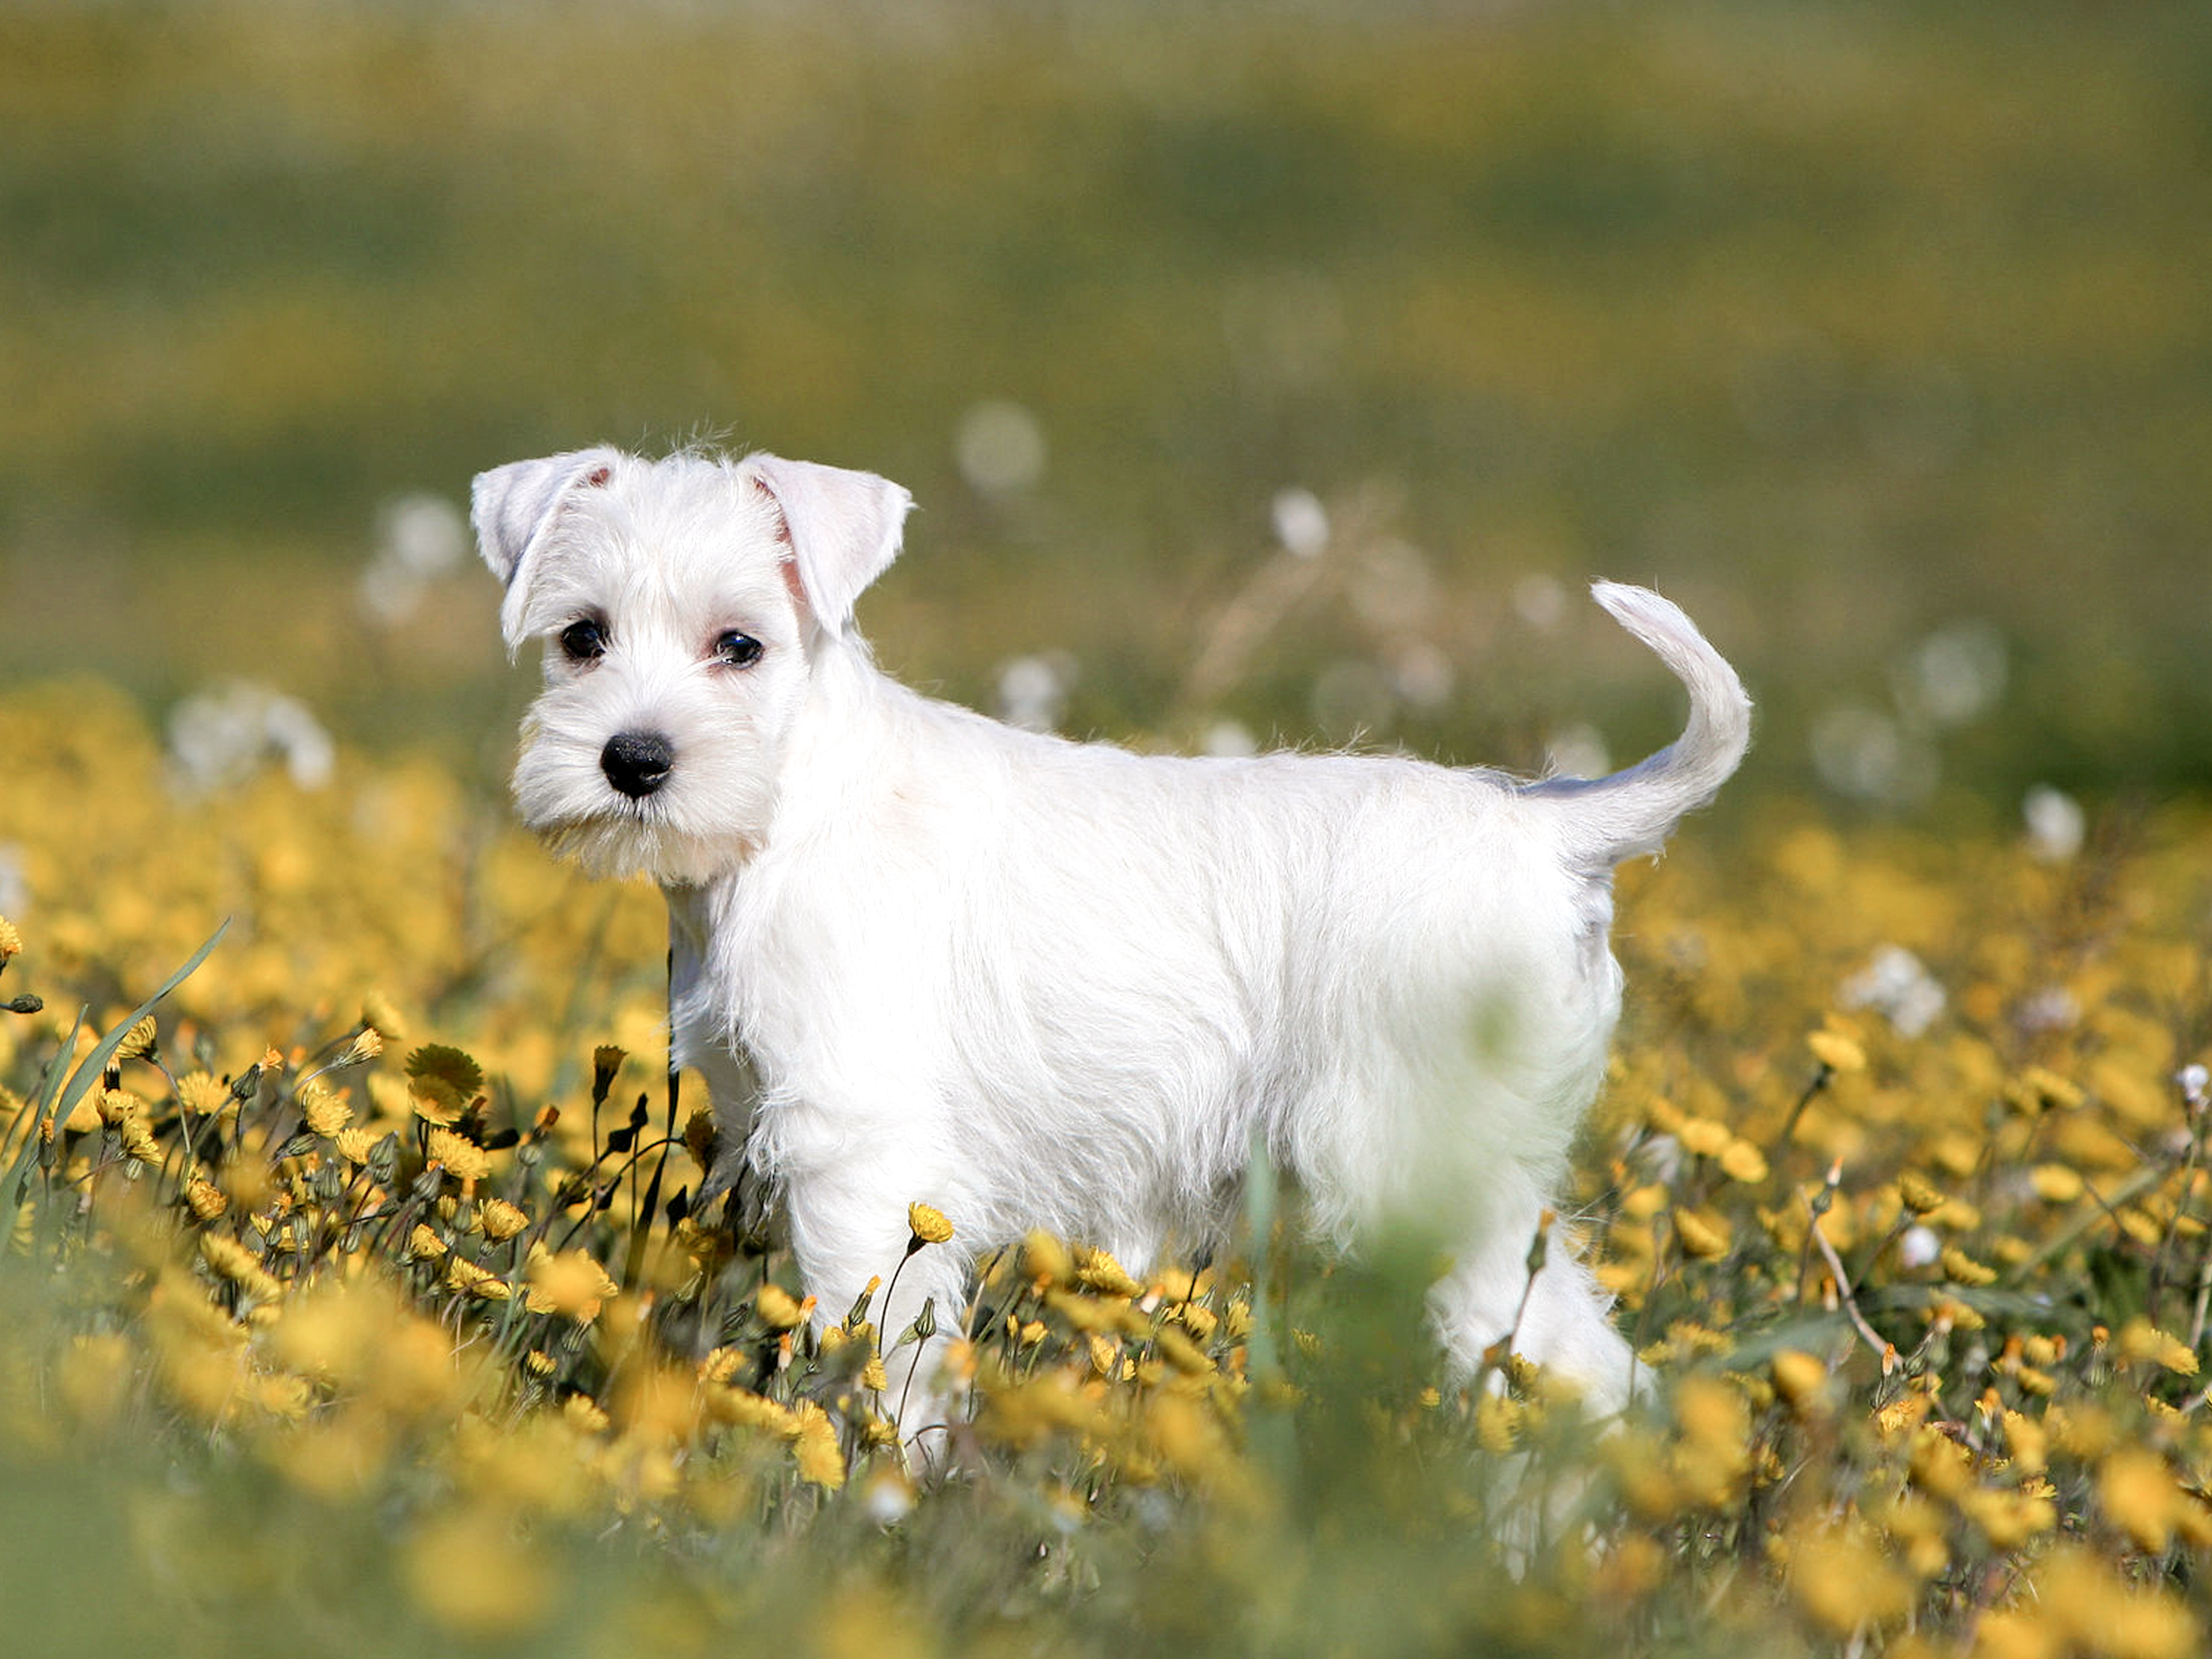 Schnauzer puppy standing outdoors in yellow flowers